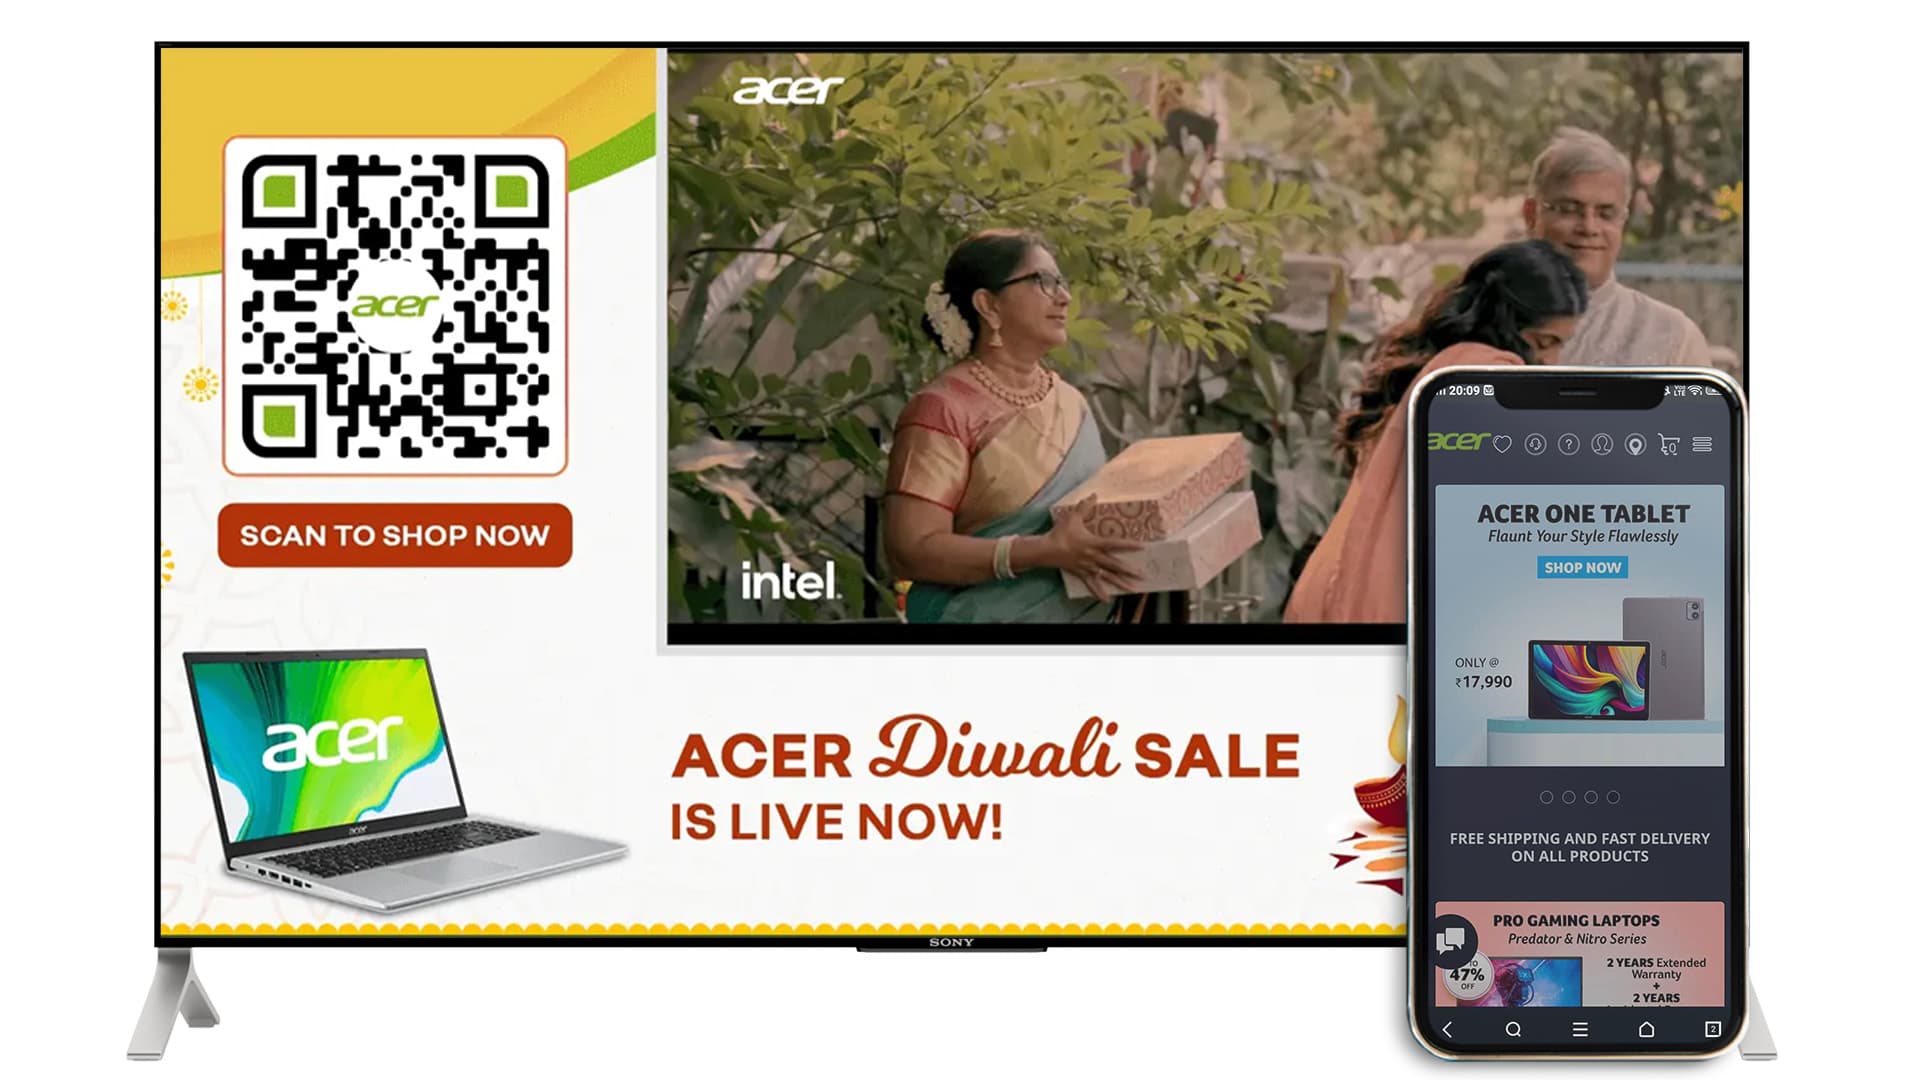 Acer's Diwali Sale Campaign Fueled By The Unstoppable Power Of VDO.AI's CTV & OTT Ads